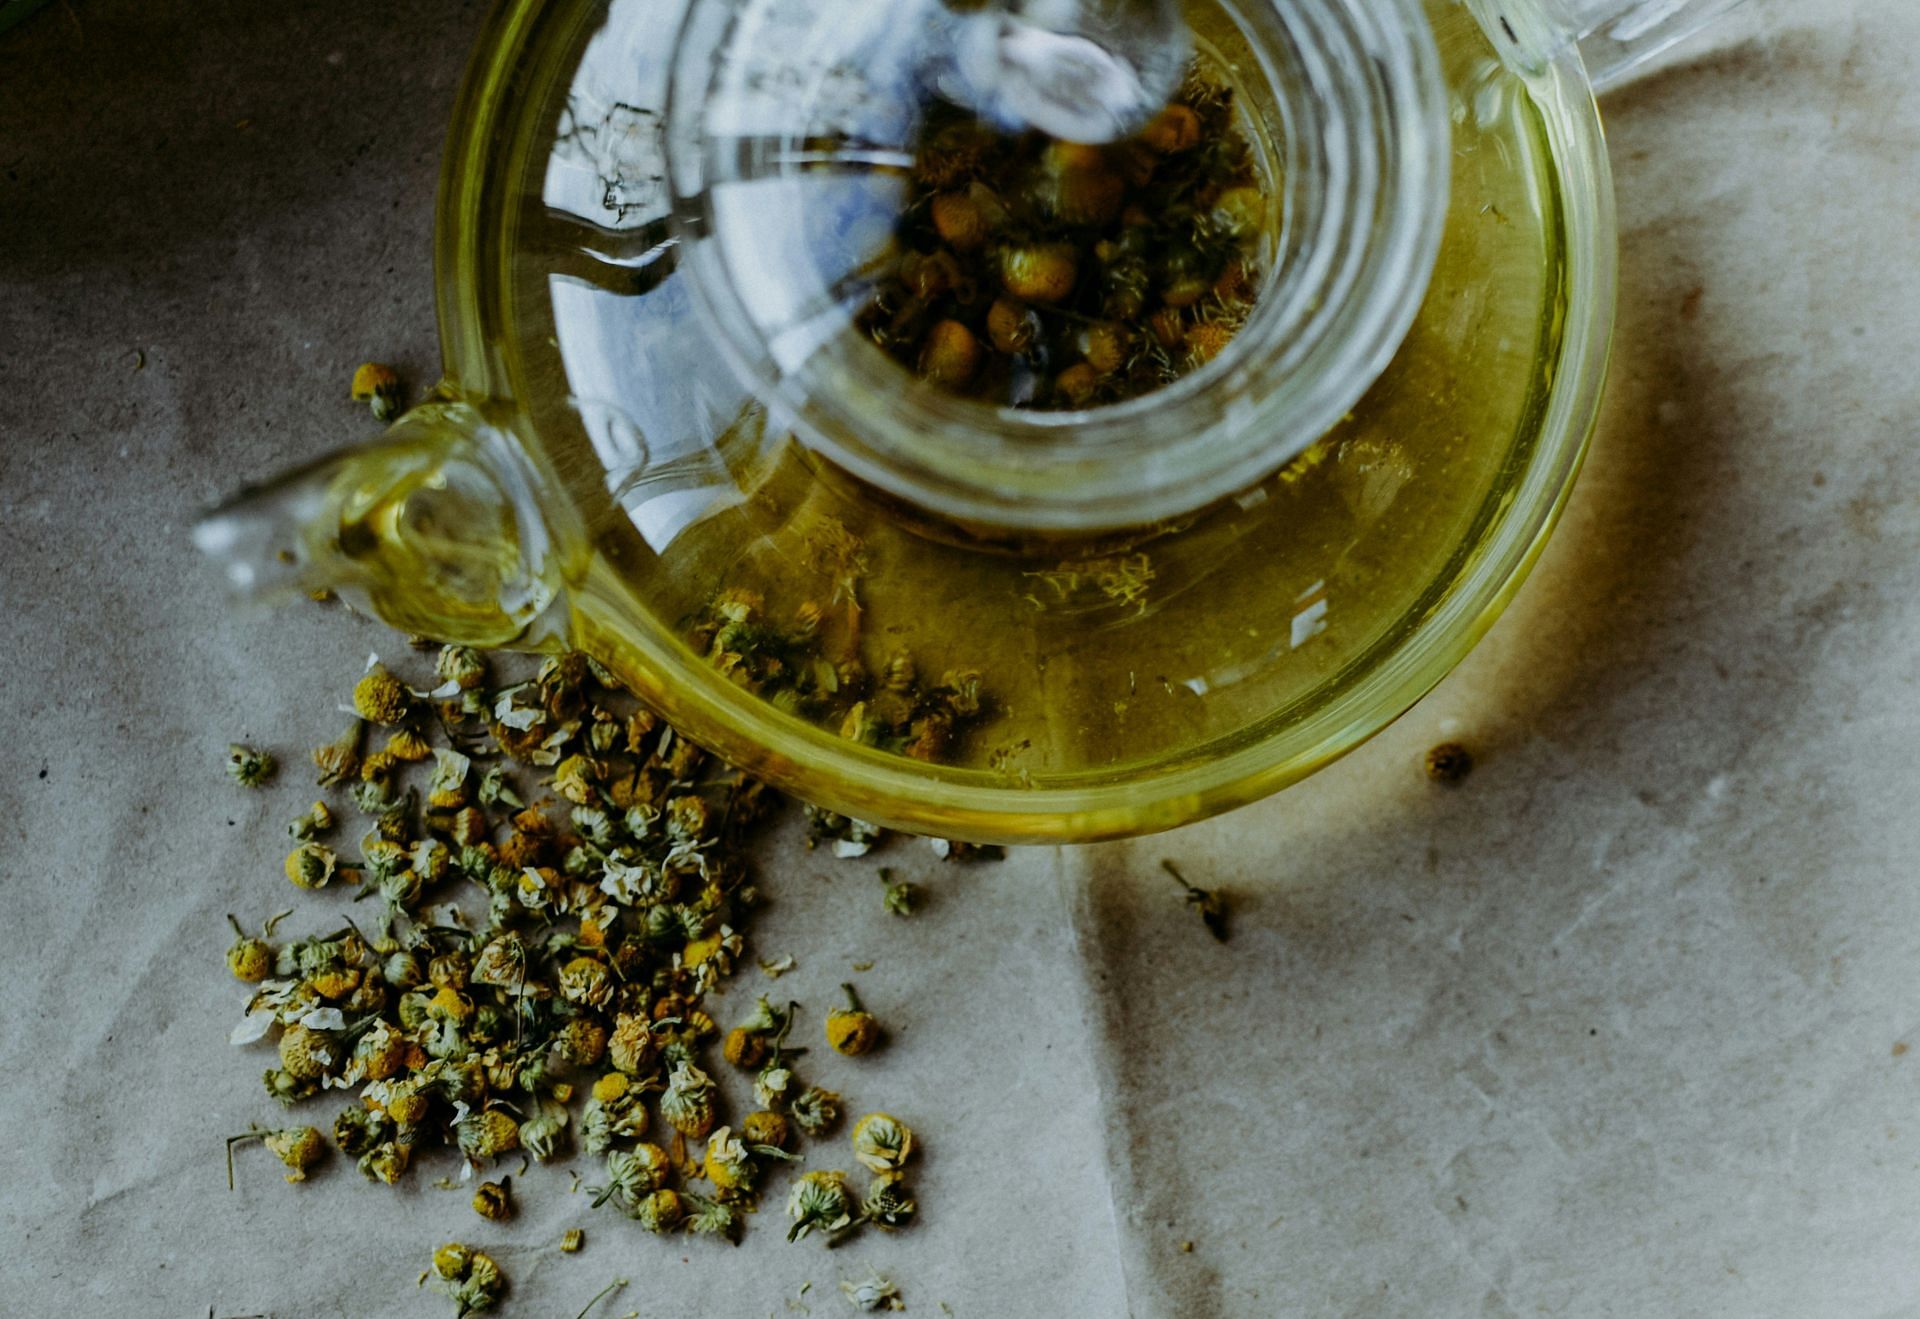 Chamomile tea can give relief from anxiety (Image by Irene Ivantsova/Unsplash)